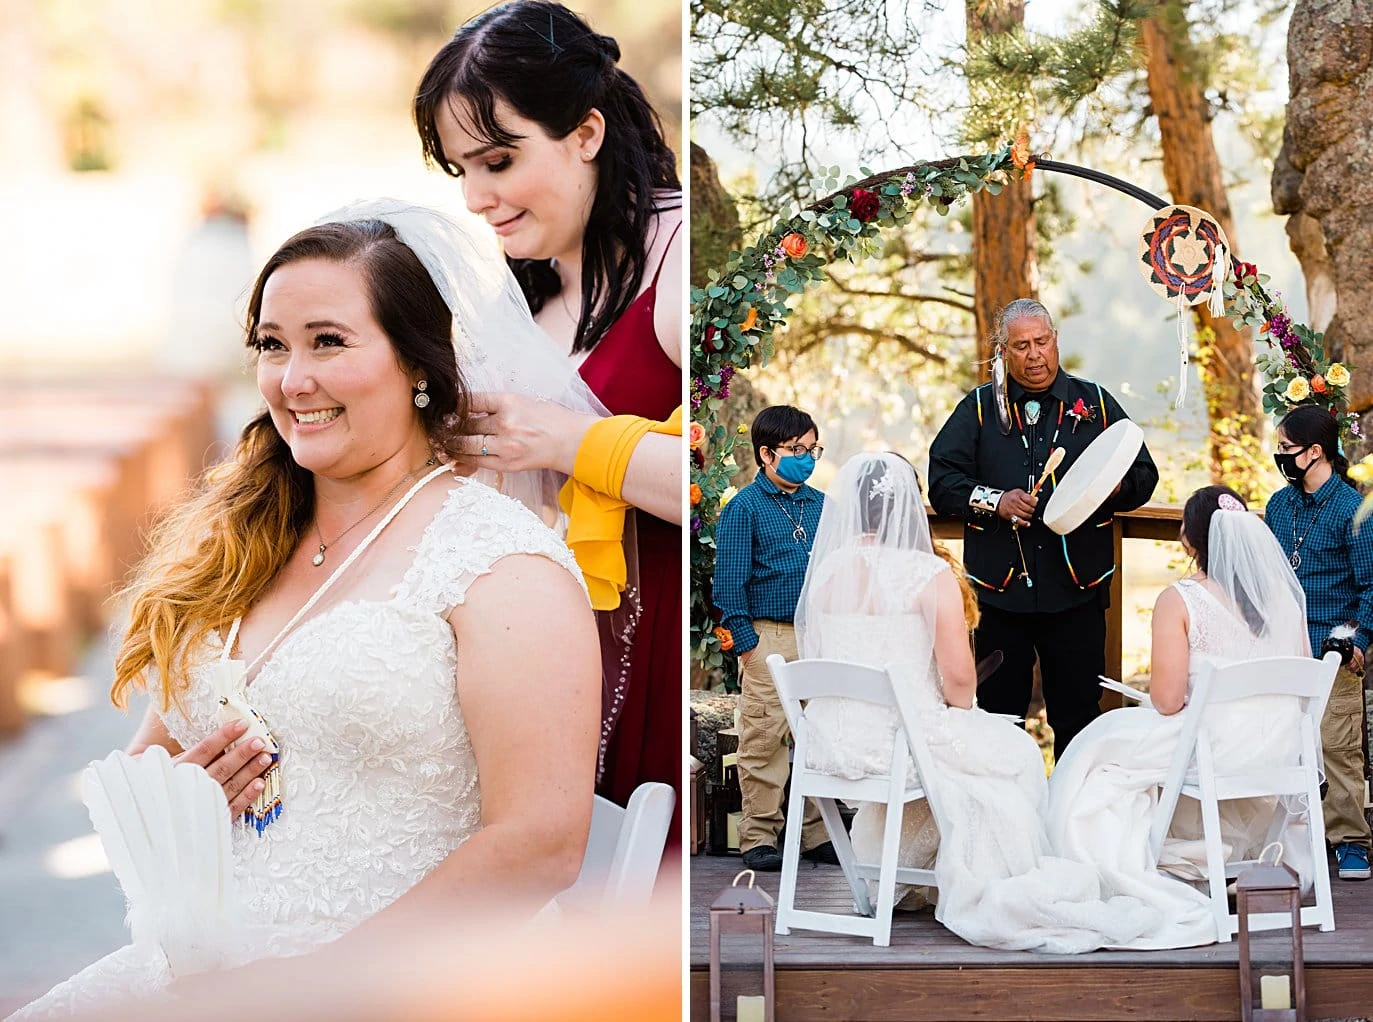 traditional native american wedding ceremony at fall Deer Creek Valley Ranch wedding by Denver wedding photographer Jennie Crate